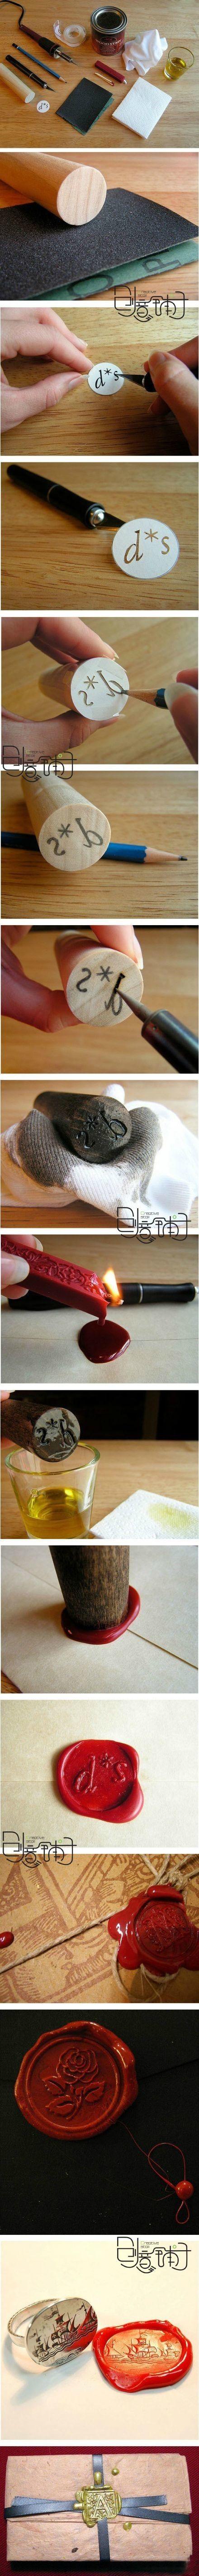 How to make your own wax seal